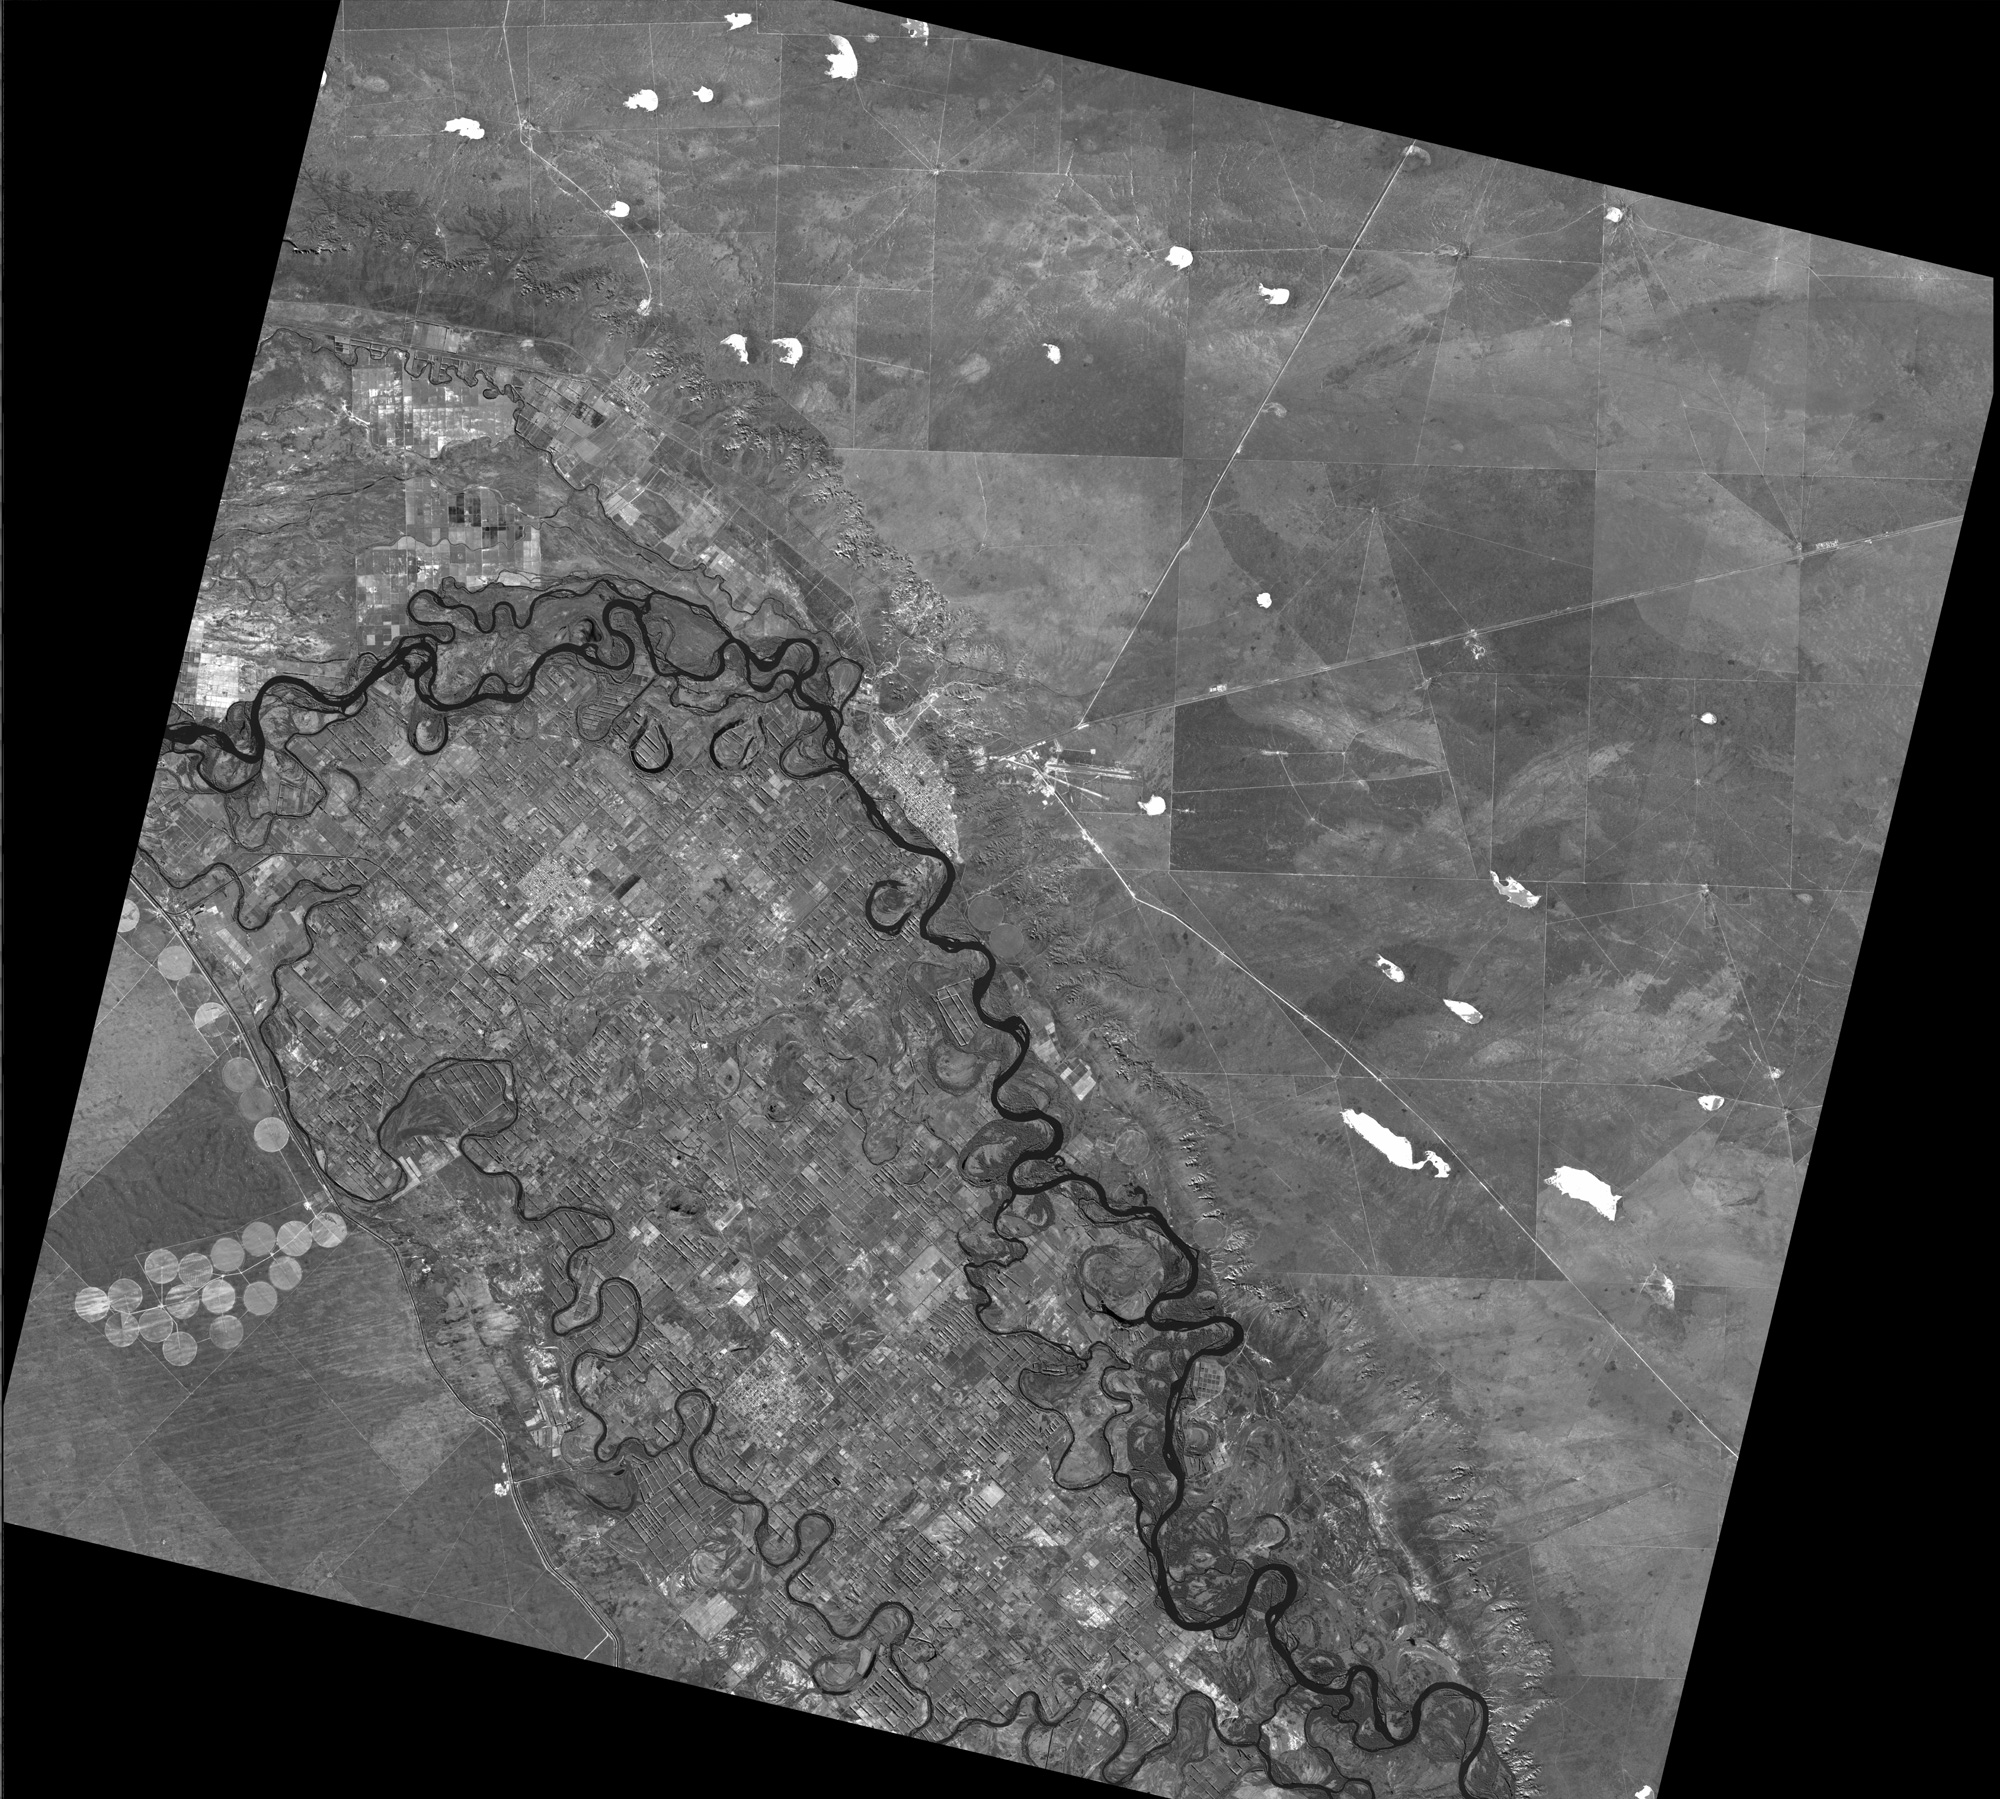 Choele-Choel City, Argentina observed by PRISM on Apr. 29, 2006(Pre-disaster)